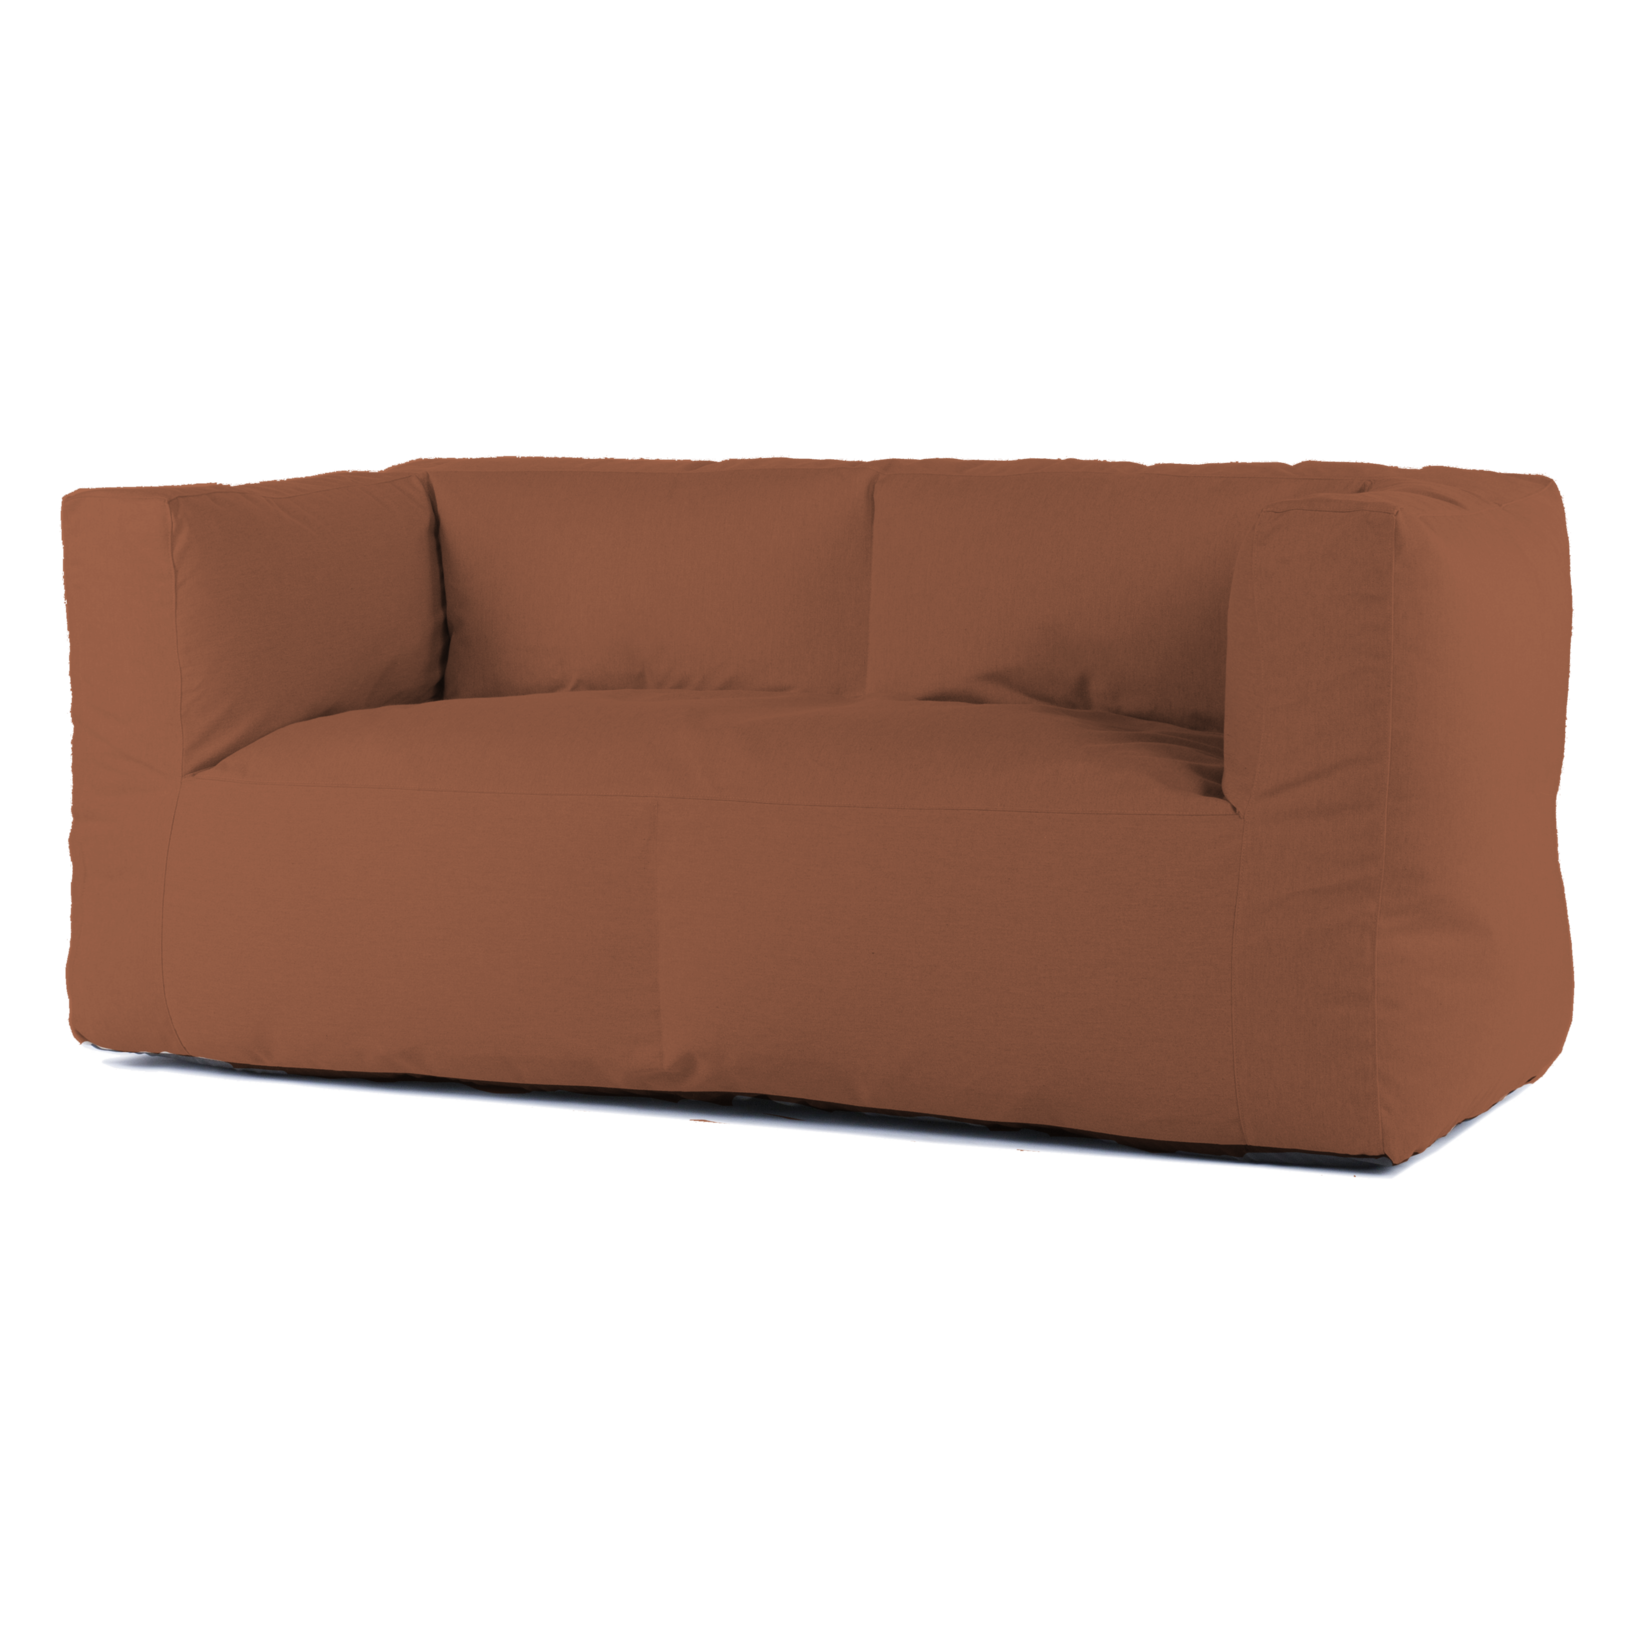 Bryck Bryck Couch | Two seat | ECOLLECTION